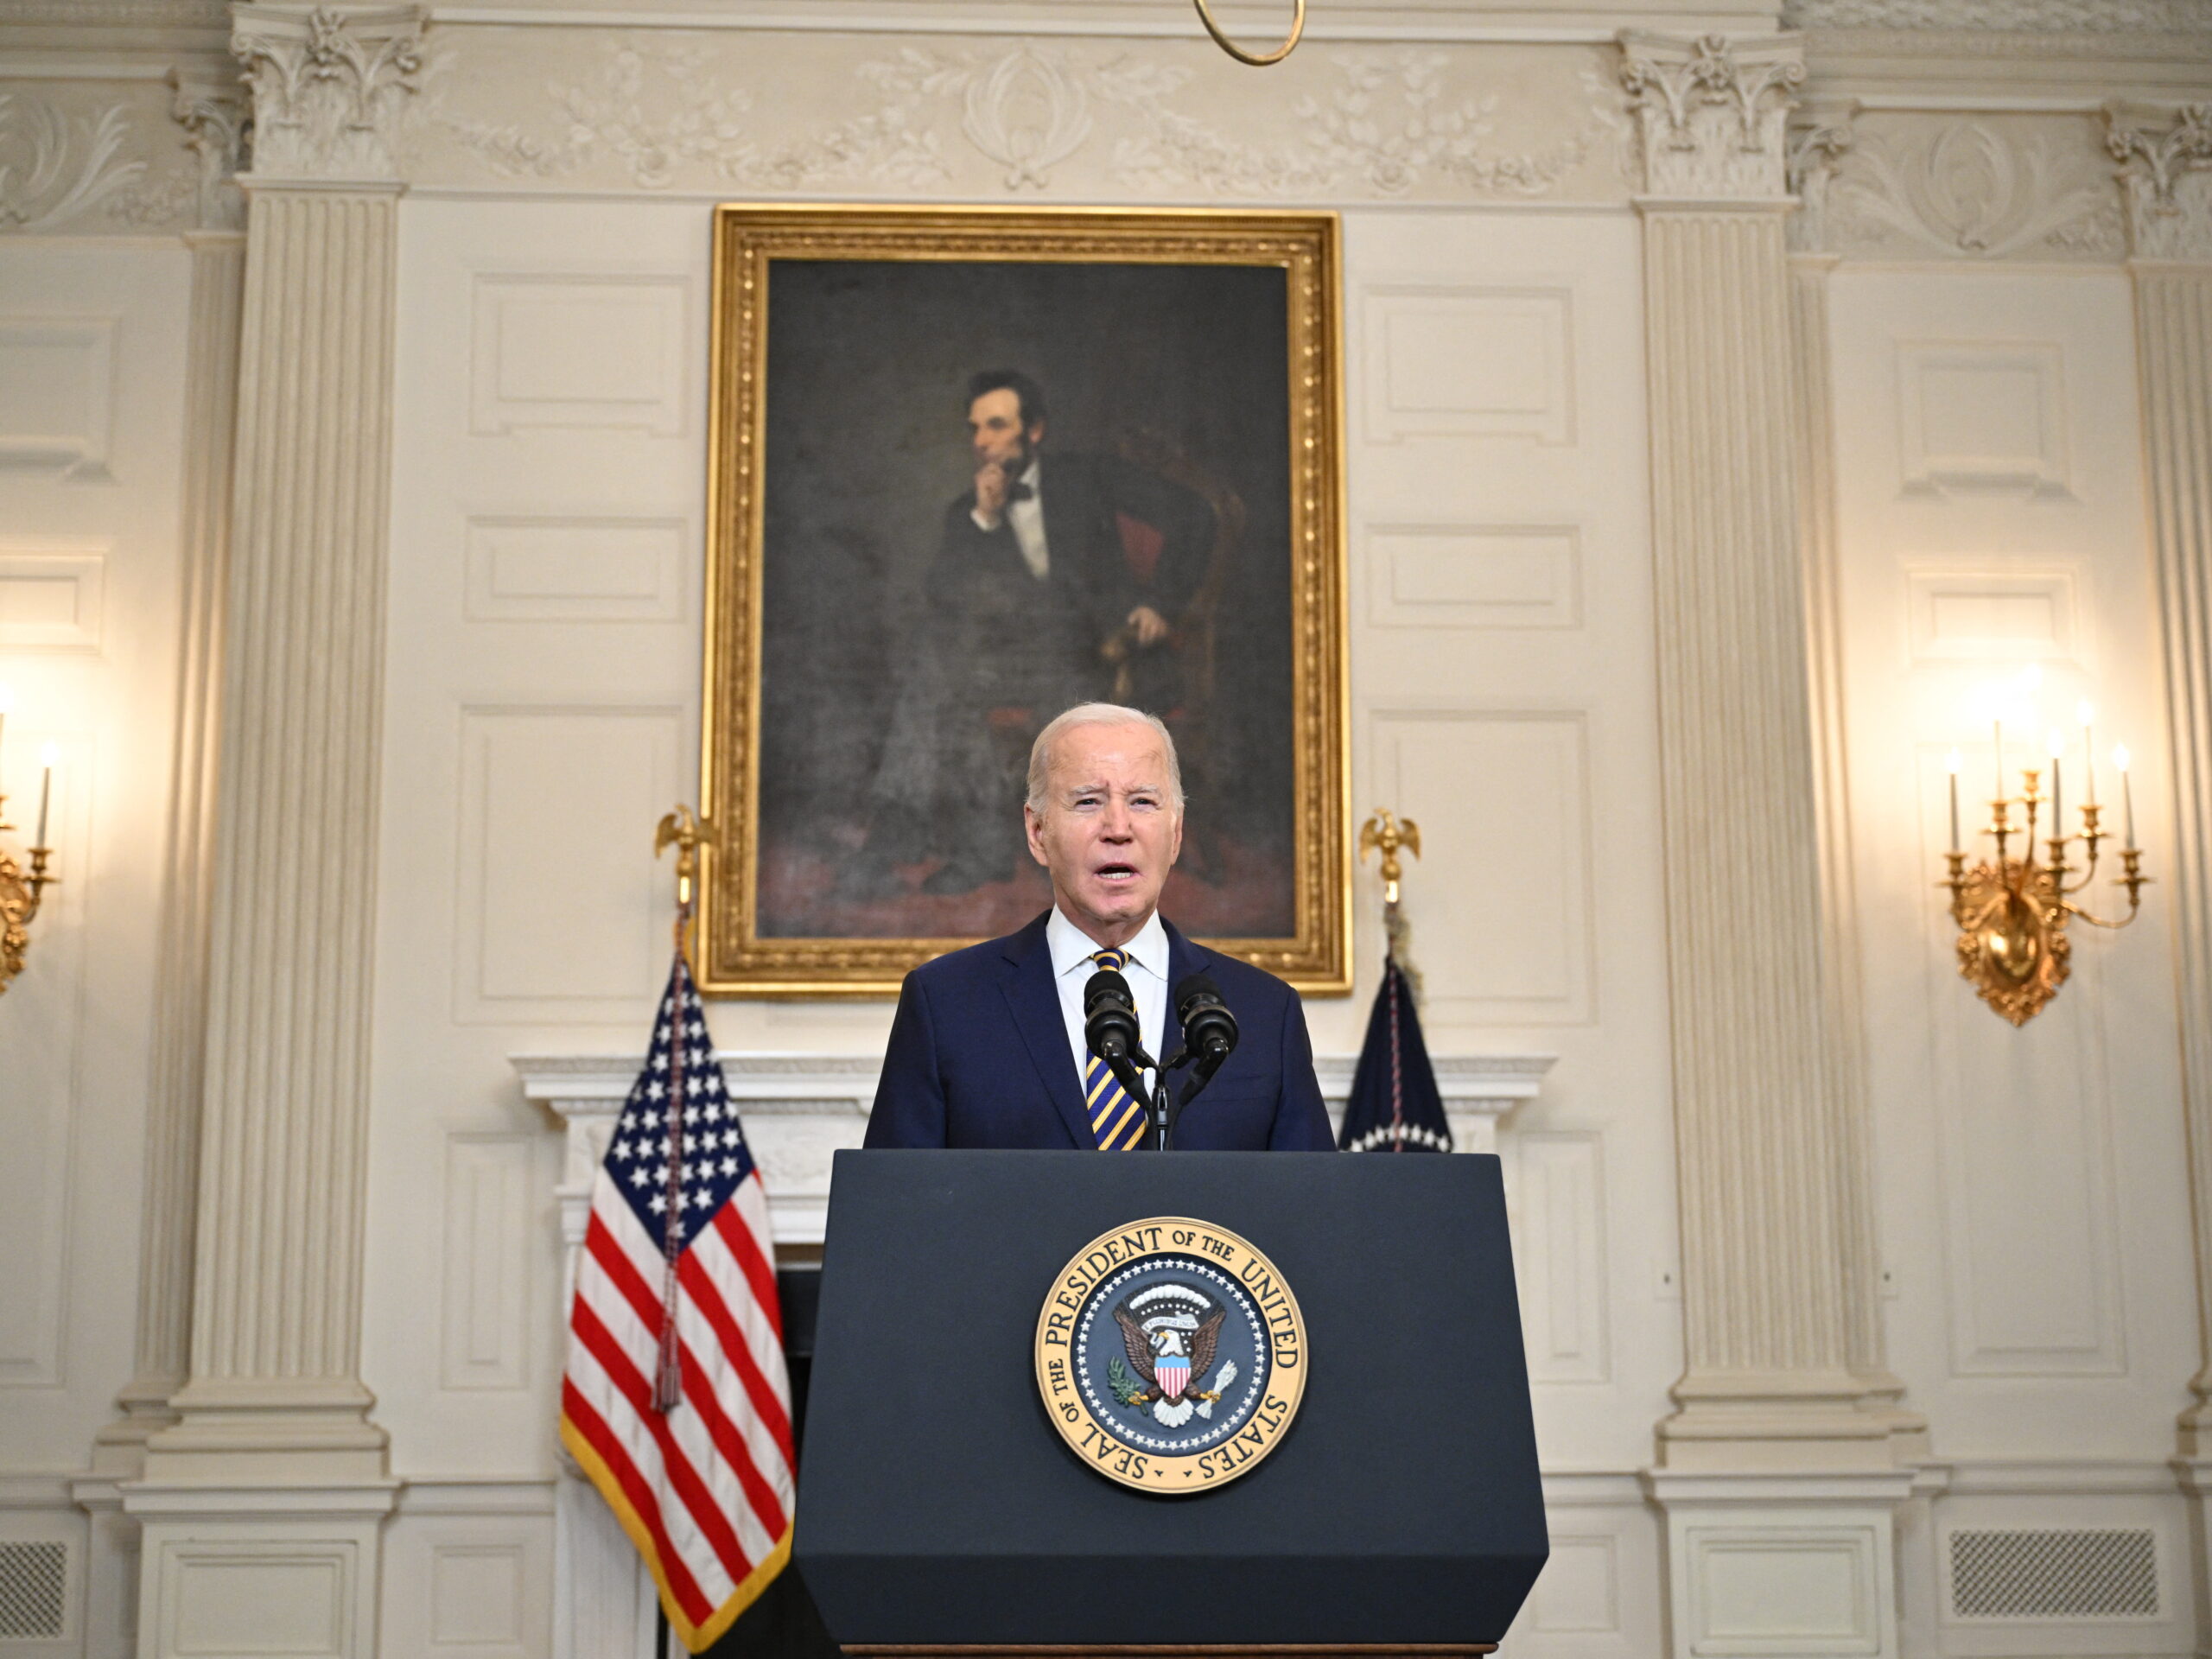 Biden’s new move is playing offense on border politics. But will voters be swayed?